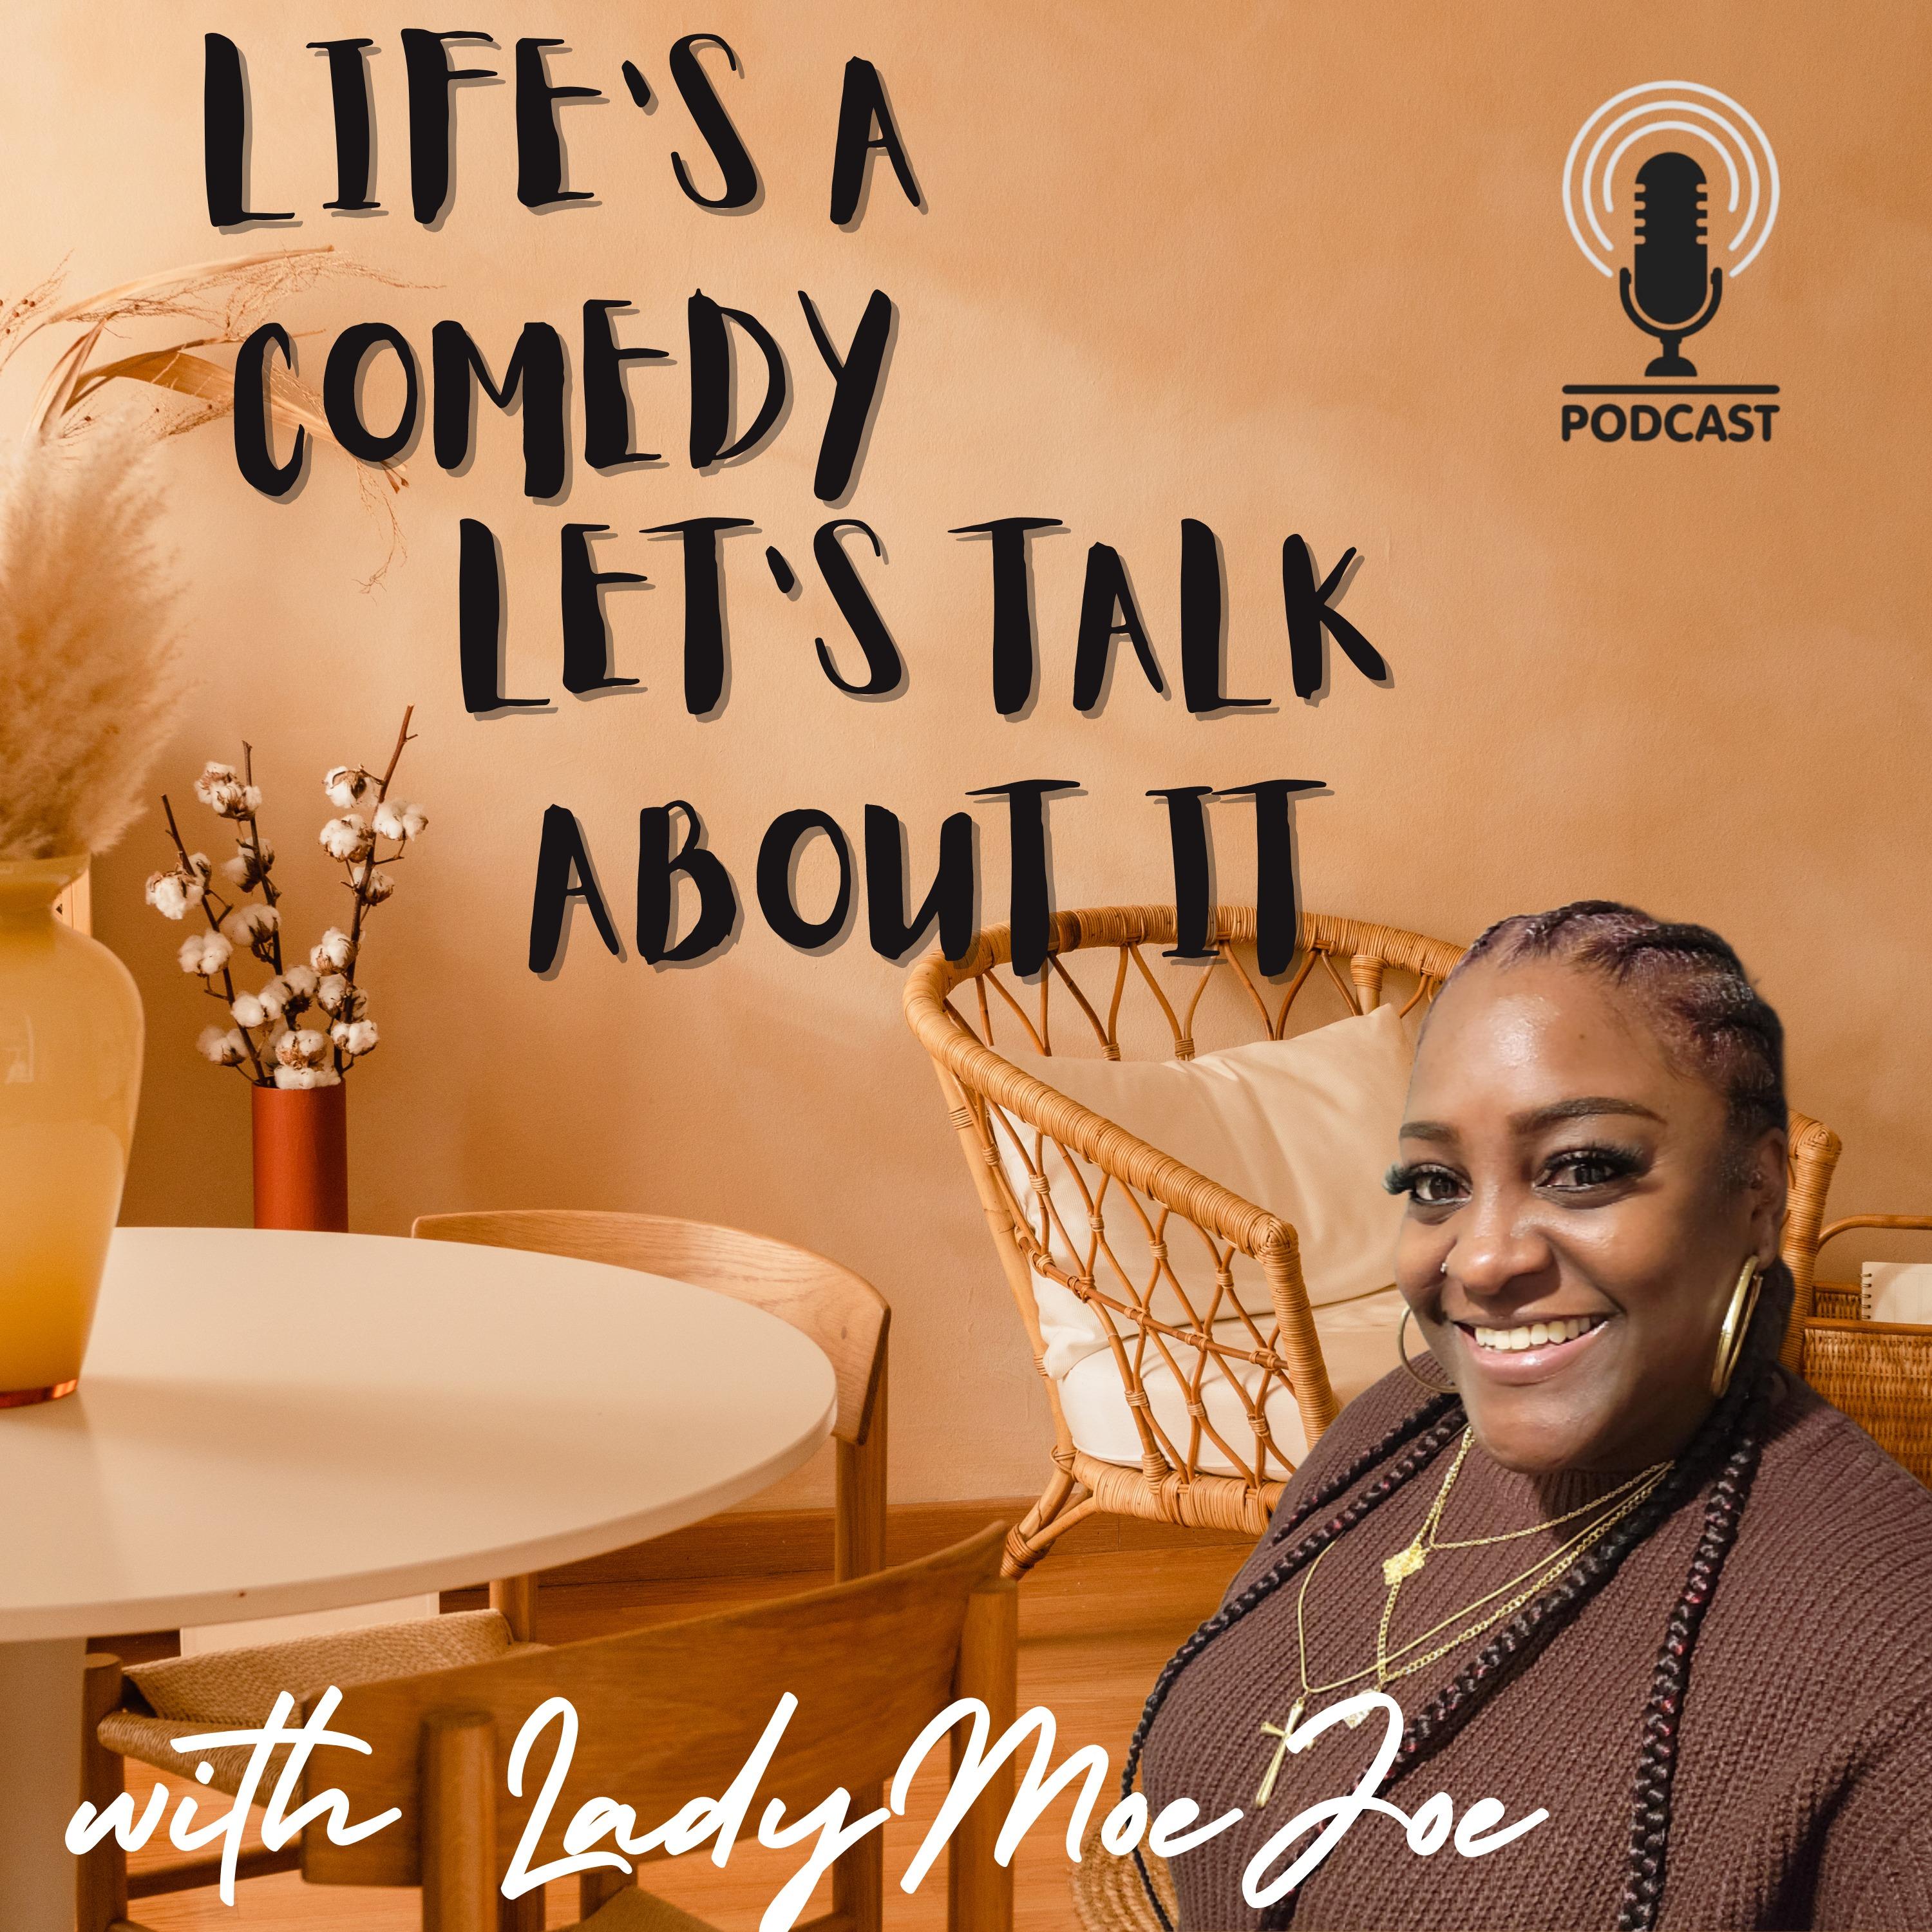 Life's a comedy - Let's talk about it!